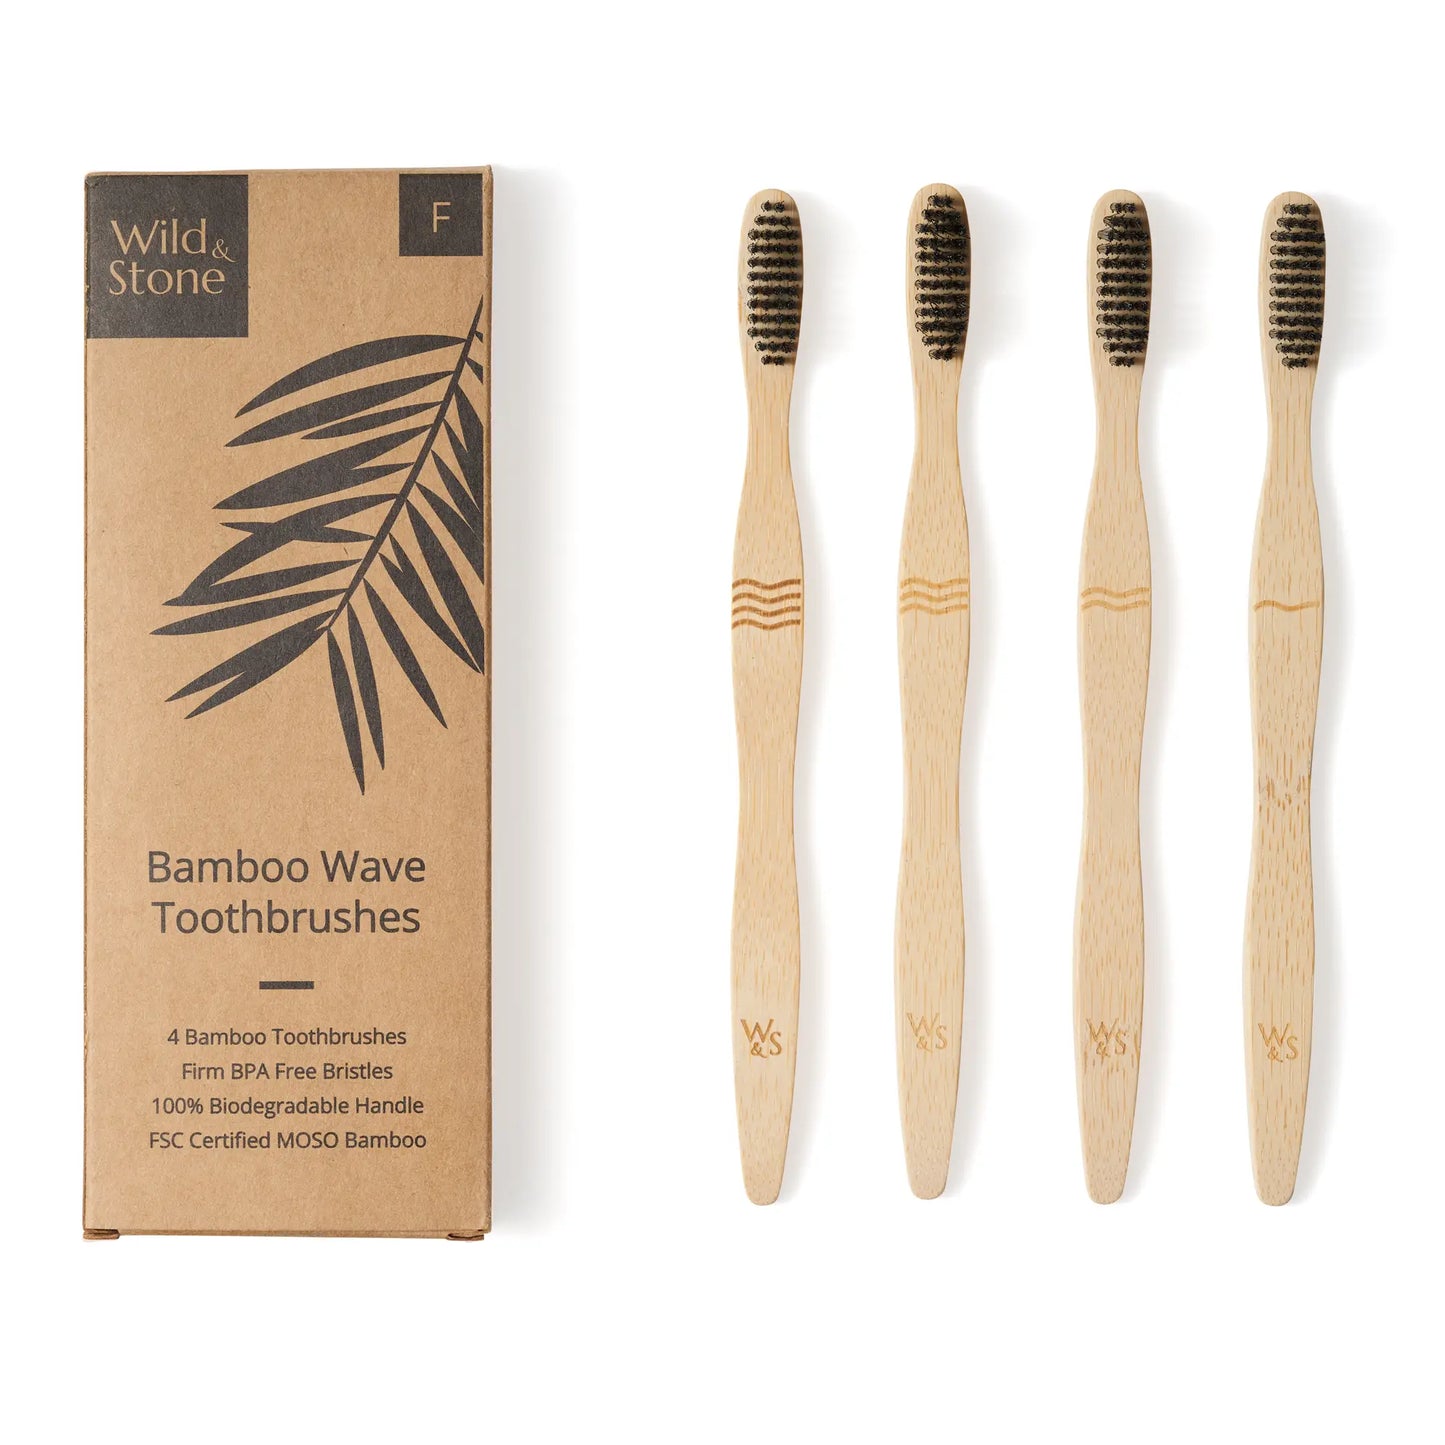 Adult Bamboo Toothbrush - 4 Pack